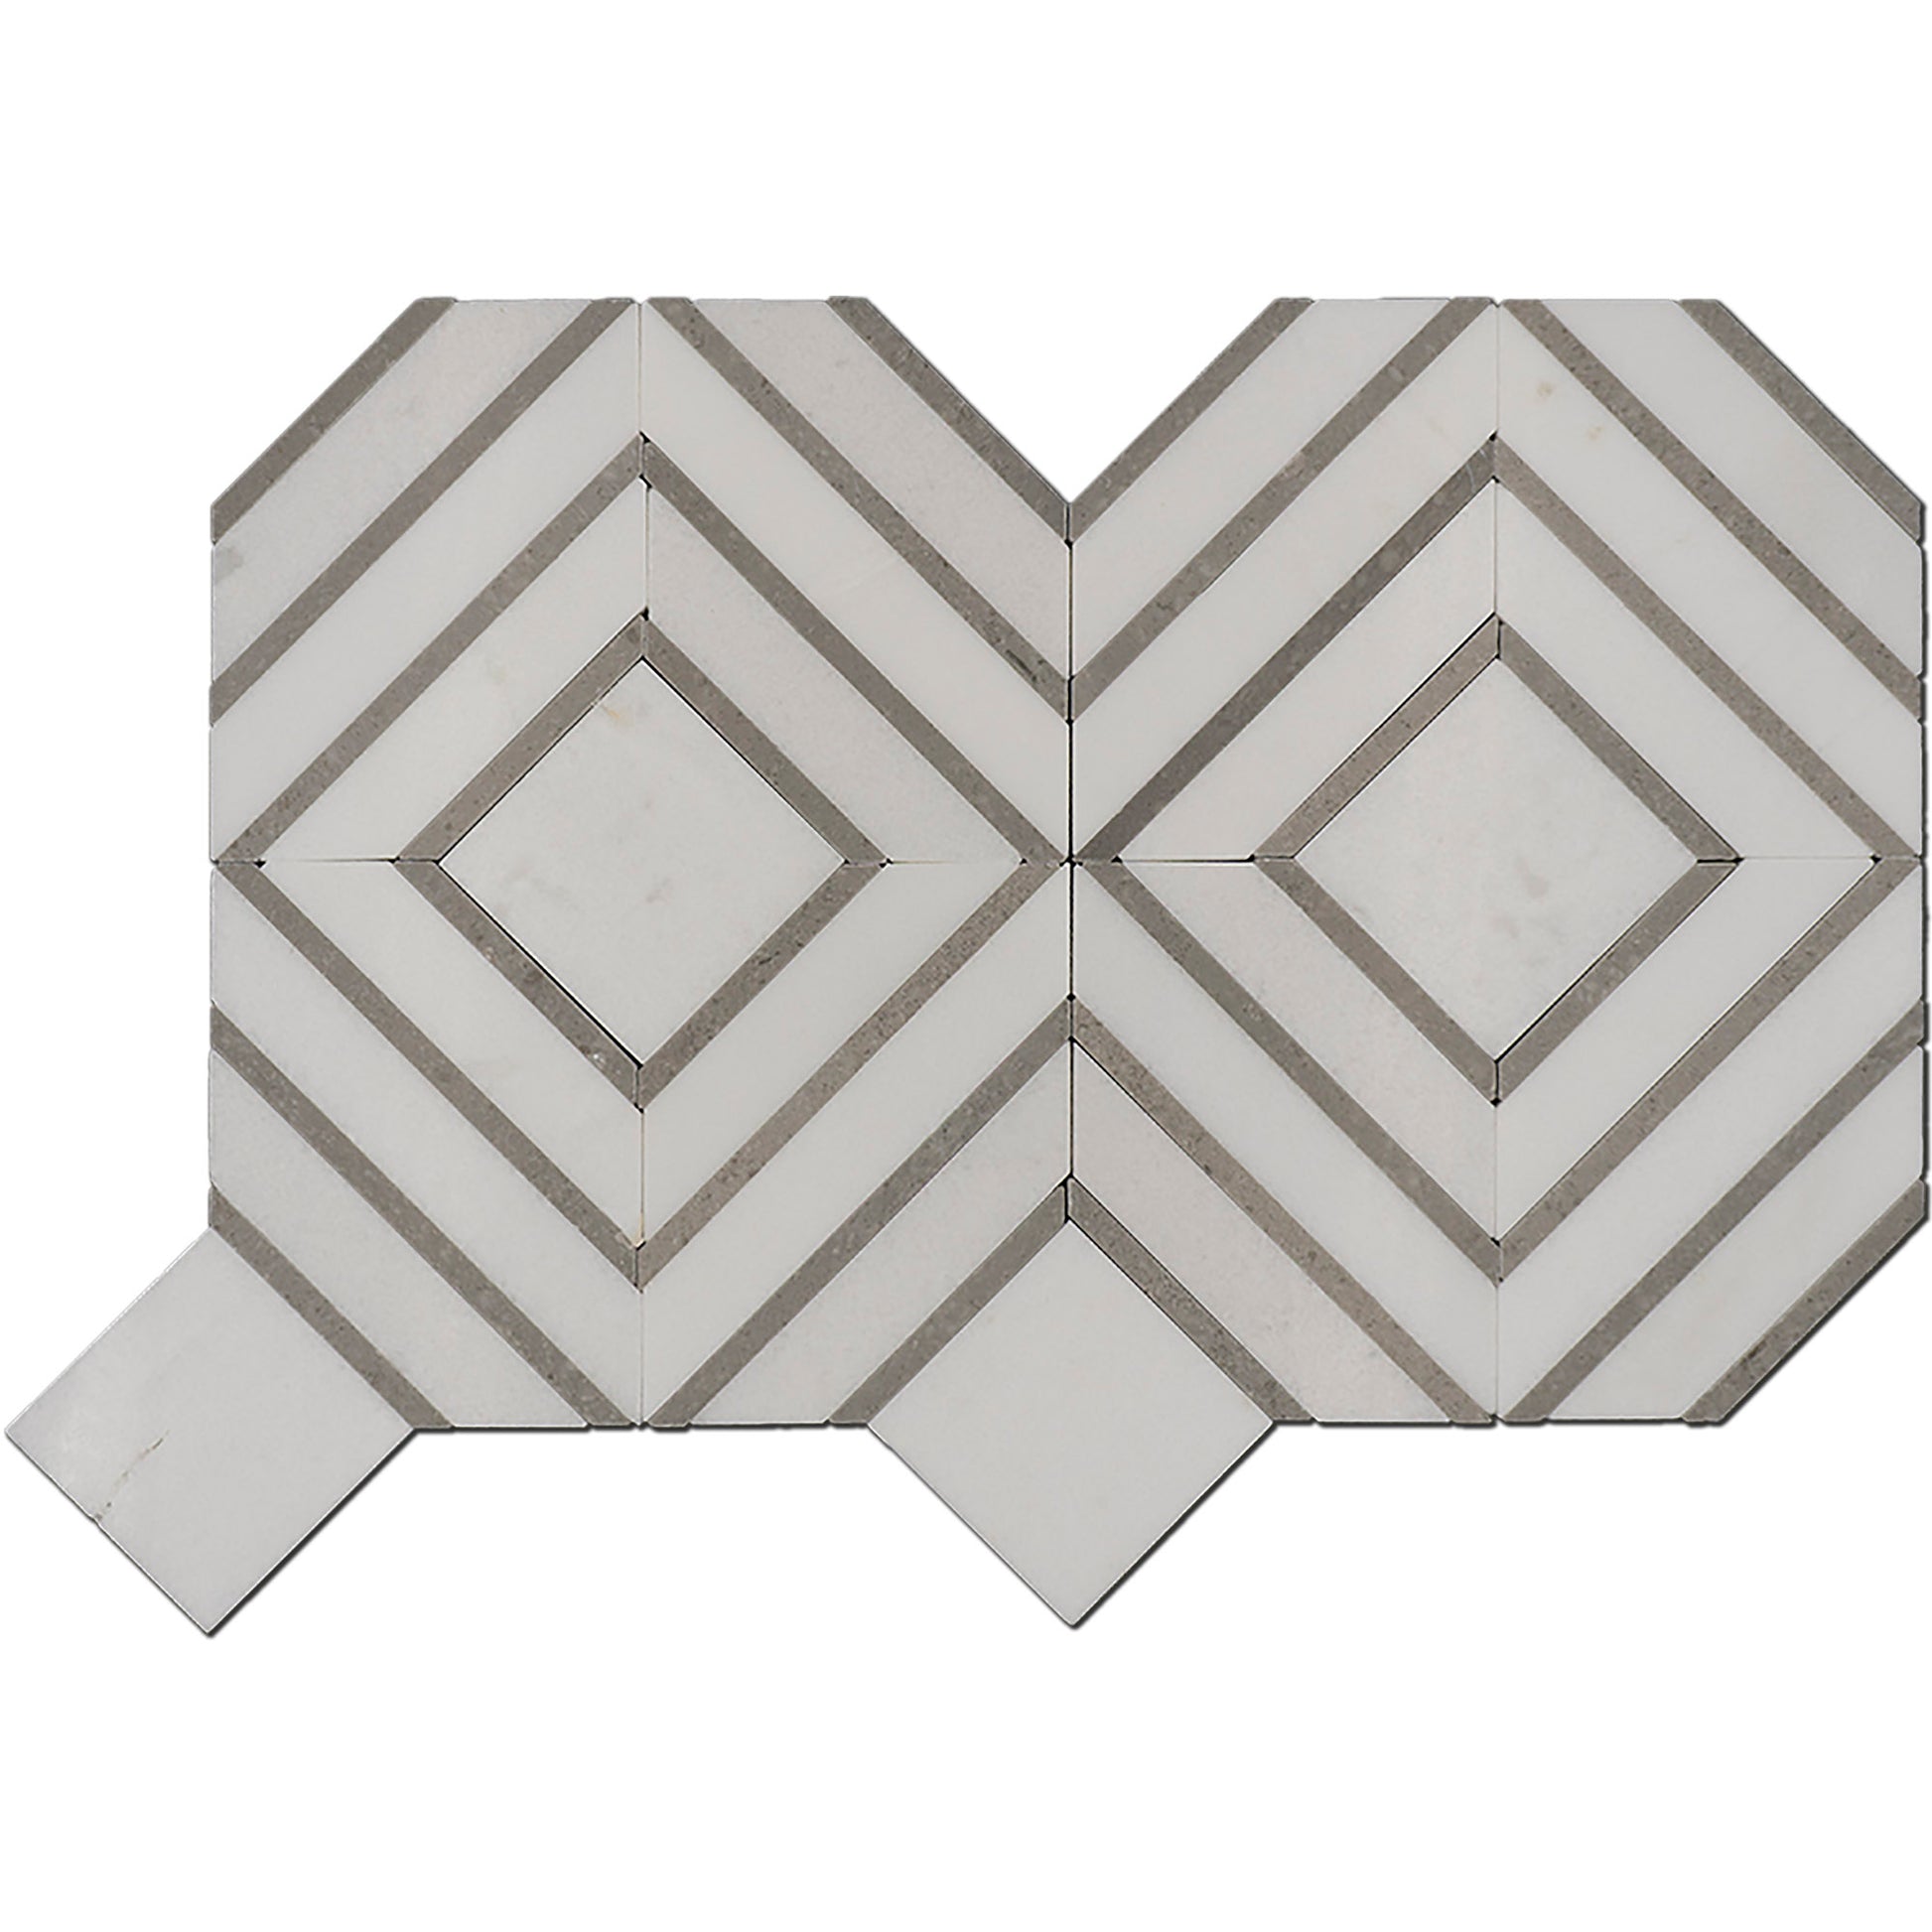 Trove Thassos W/ Grey Marble  - Polished Floor and Wall Mosaic